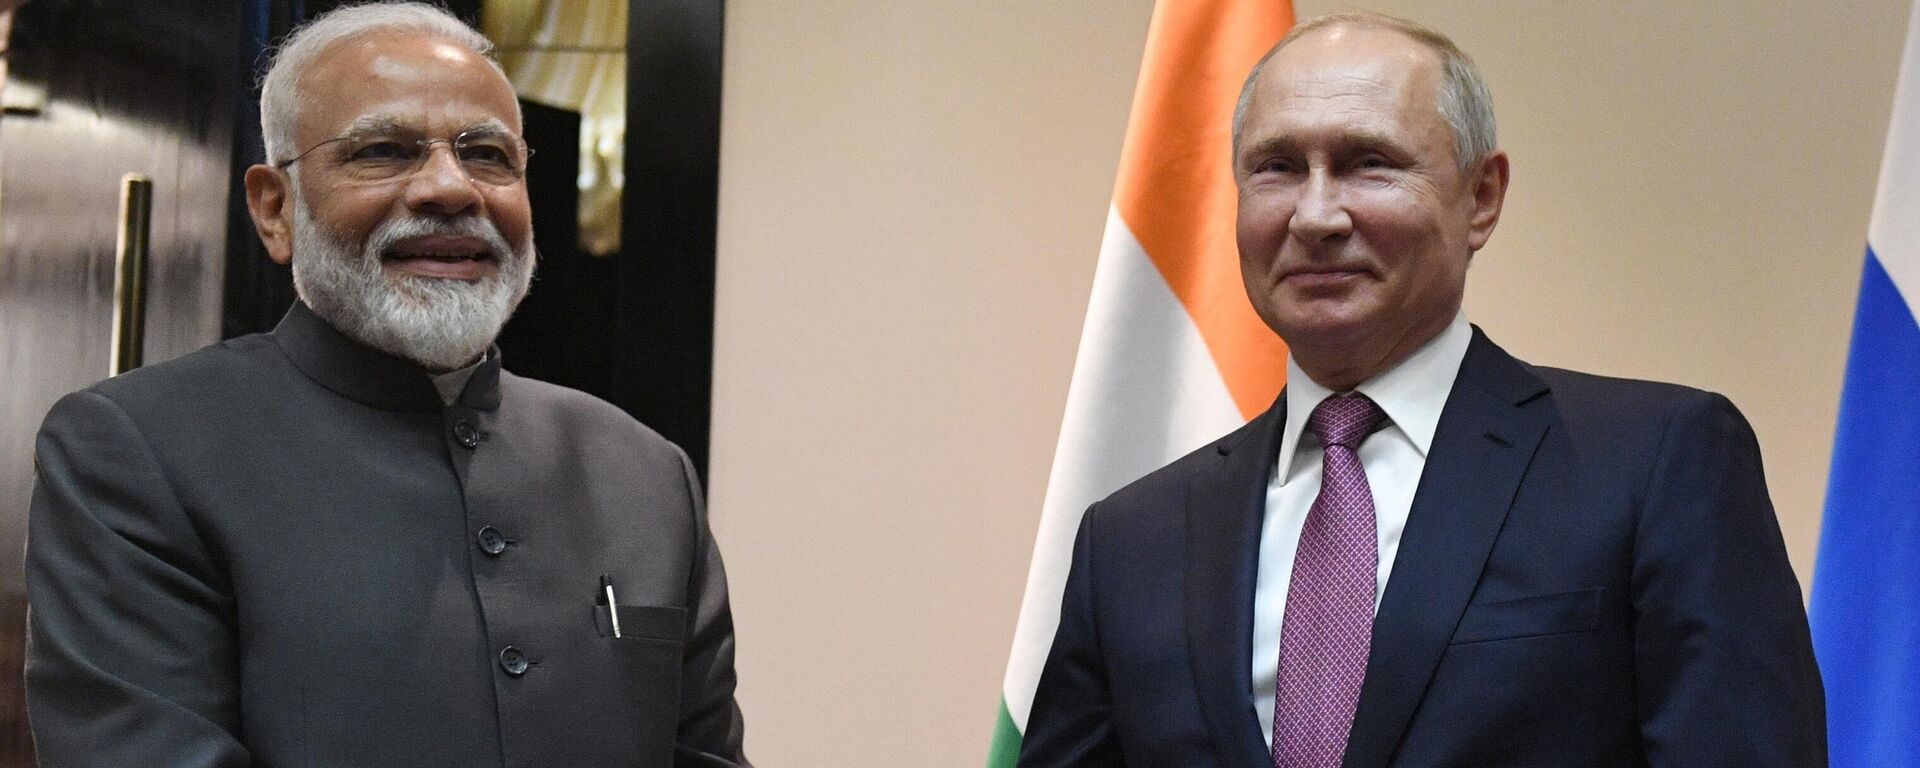 Russian President Vladimir Putin, right, and Indian Prime Minister Narendra Modi pose for a photo prior to their talks on a sideline of the Shanghai Cooperation Organization summit in Bishkek, Kyrgyzstan, June 13, 2019 - Sputnik भारत, 1920, 28.08.2023